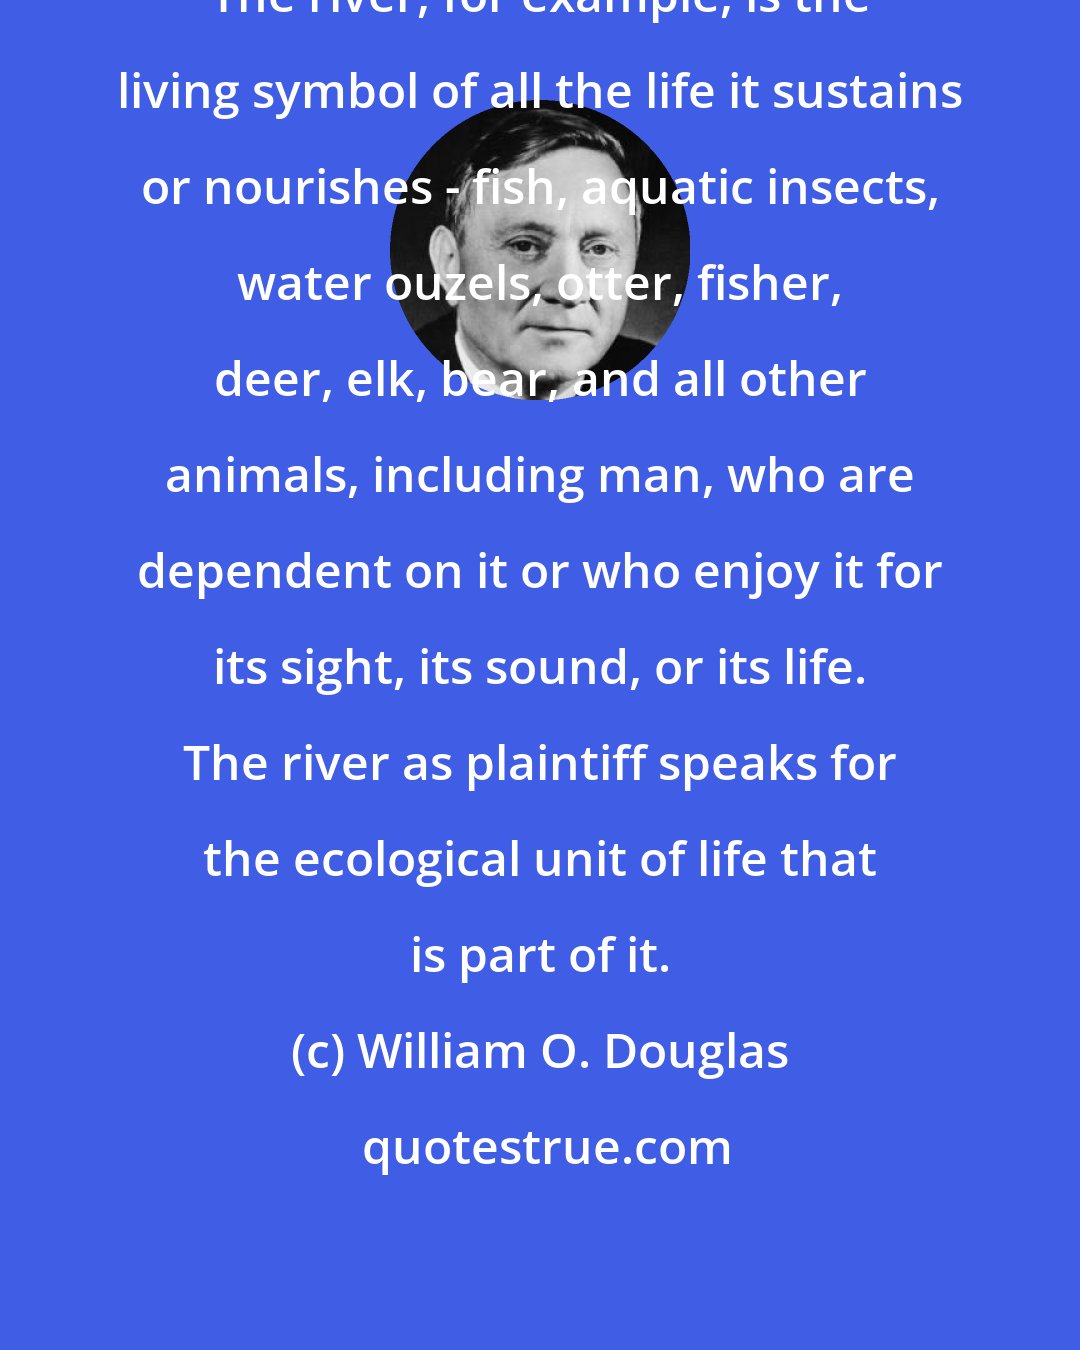 William O. Douglas: The river, for example, is the living symbol of all the life it sustains or nourishes - fish, aquatic insects, water ouzels, otter, fisher, deer, elk, bear, and all other animals, including man, who are dependent on it or who enjoy it for its sight, its sound, or its life. The river as plaintiff speaks for the ecological unit of life that is part of it.